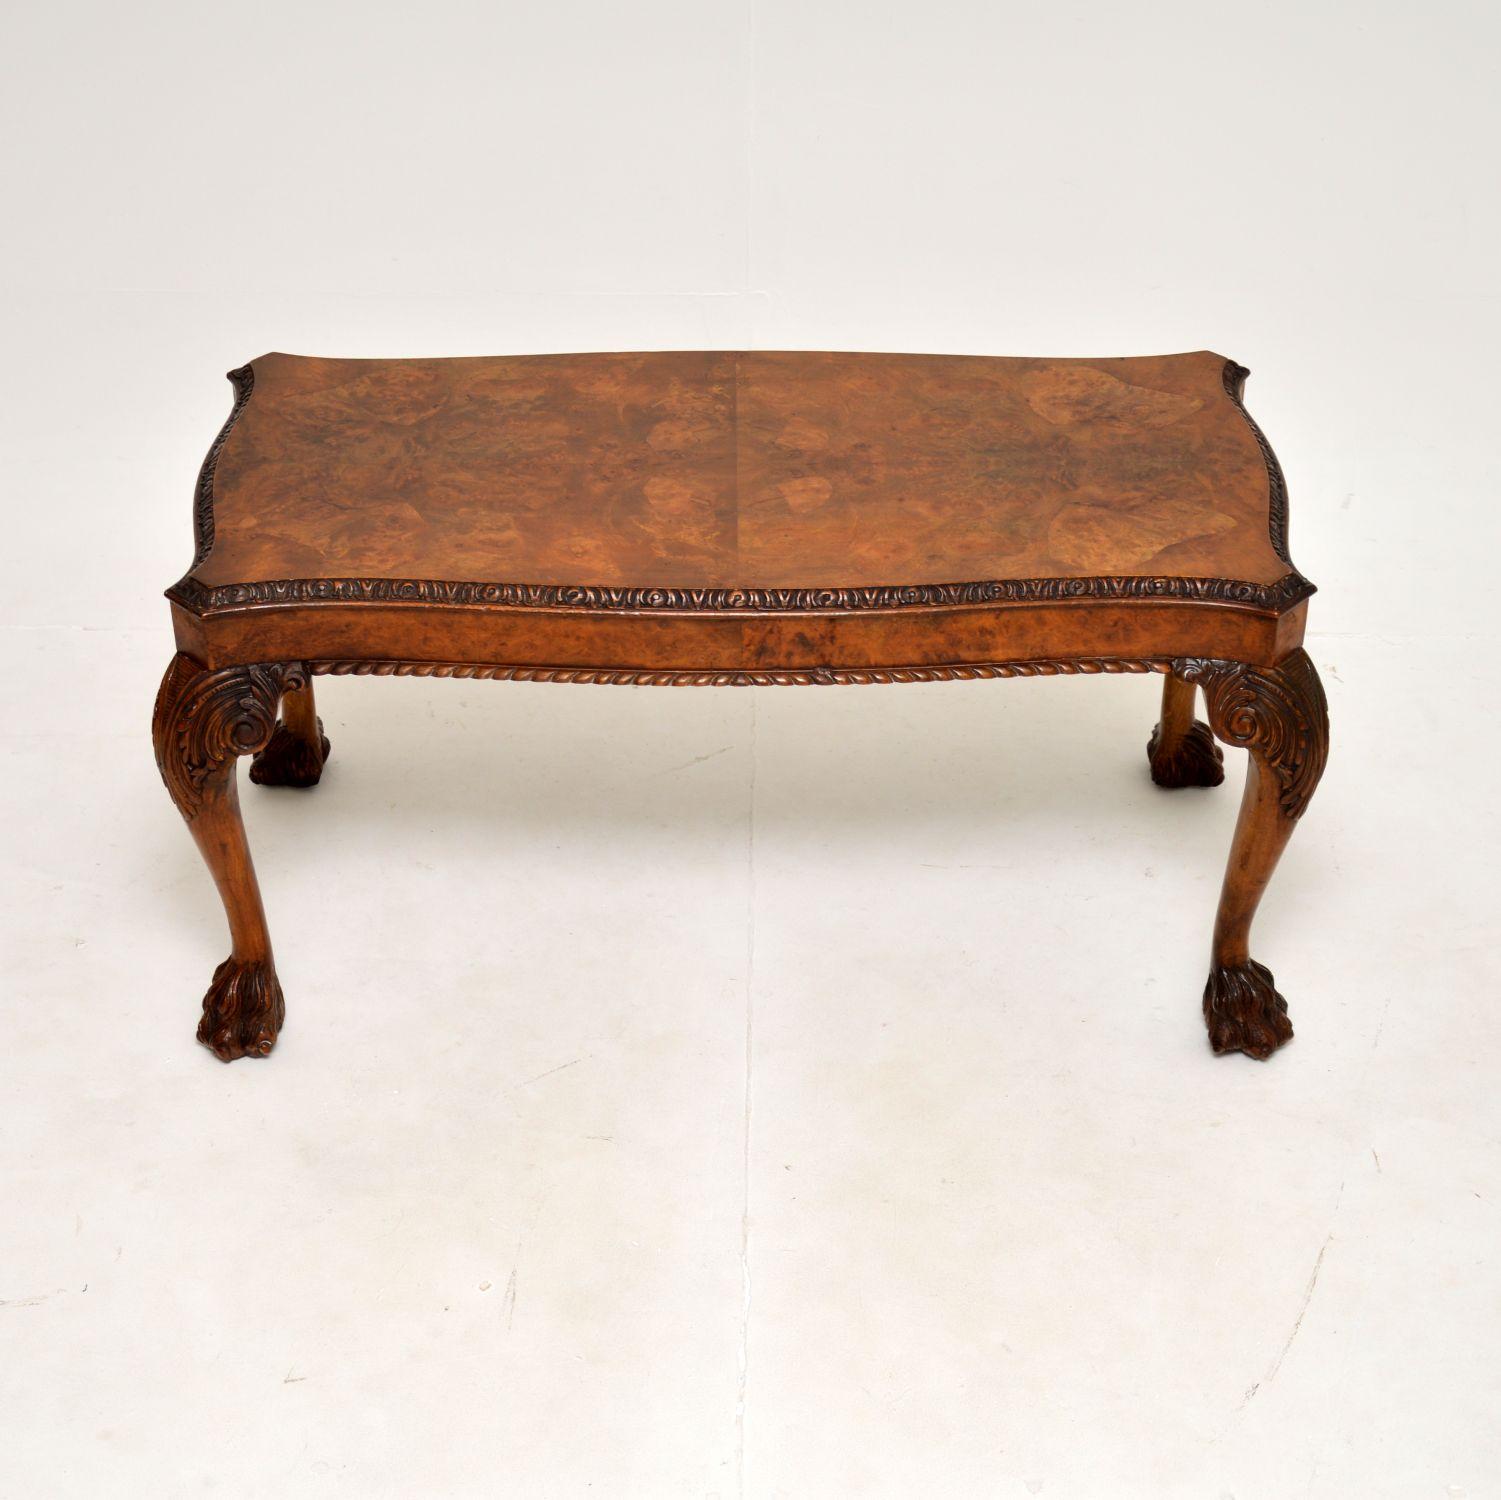 A gorgeous antique burr walnut coffee table in the Queen Anne style. This was made in England, it dates from the 1930’s.

It is of exceptional quality, the serpentine shaped top has a beautifully carved upper and lower edges. The cabriole legs have